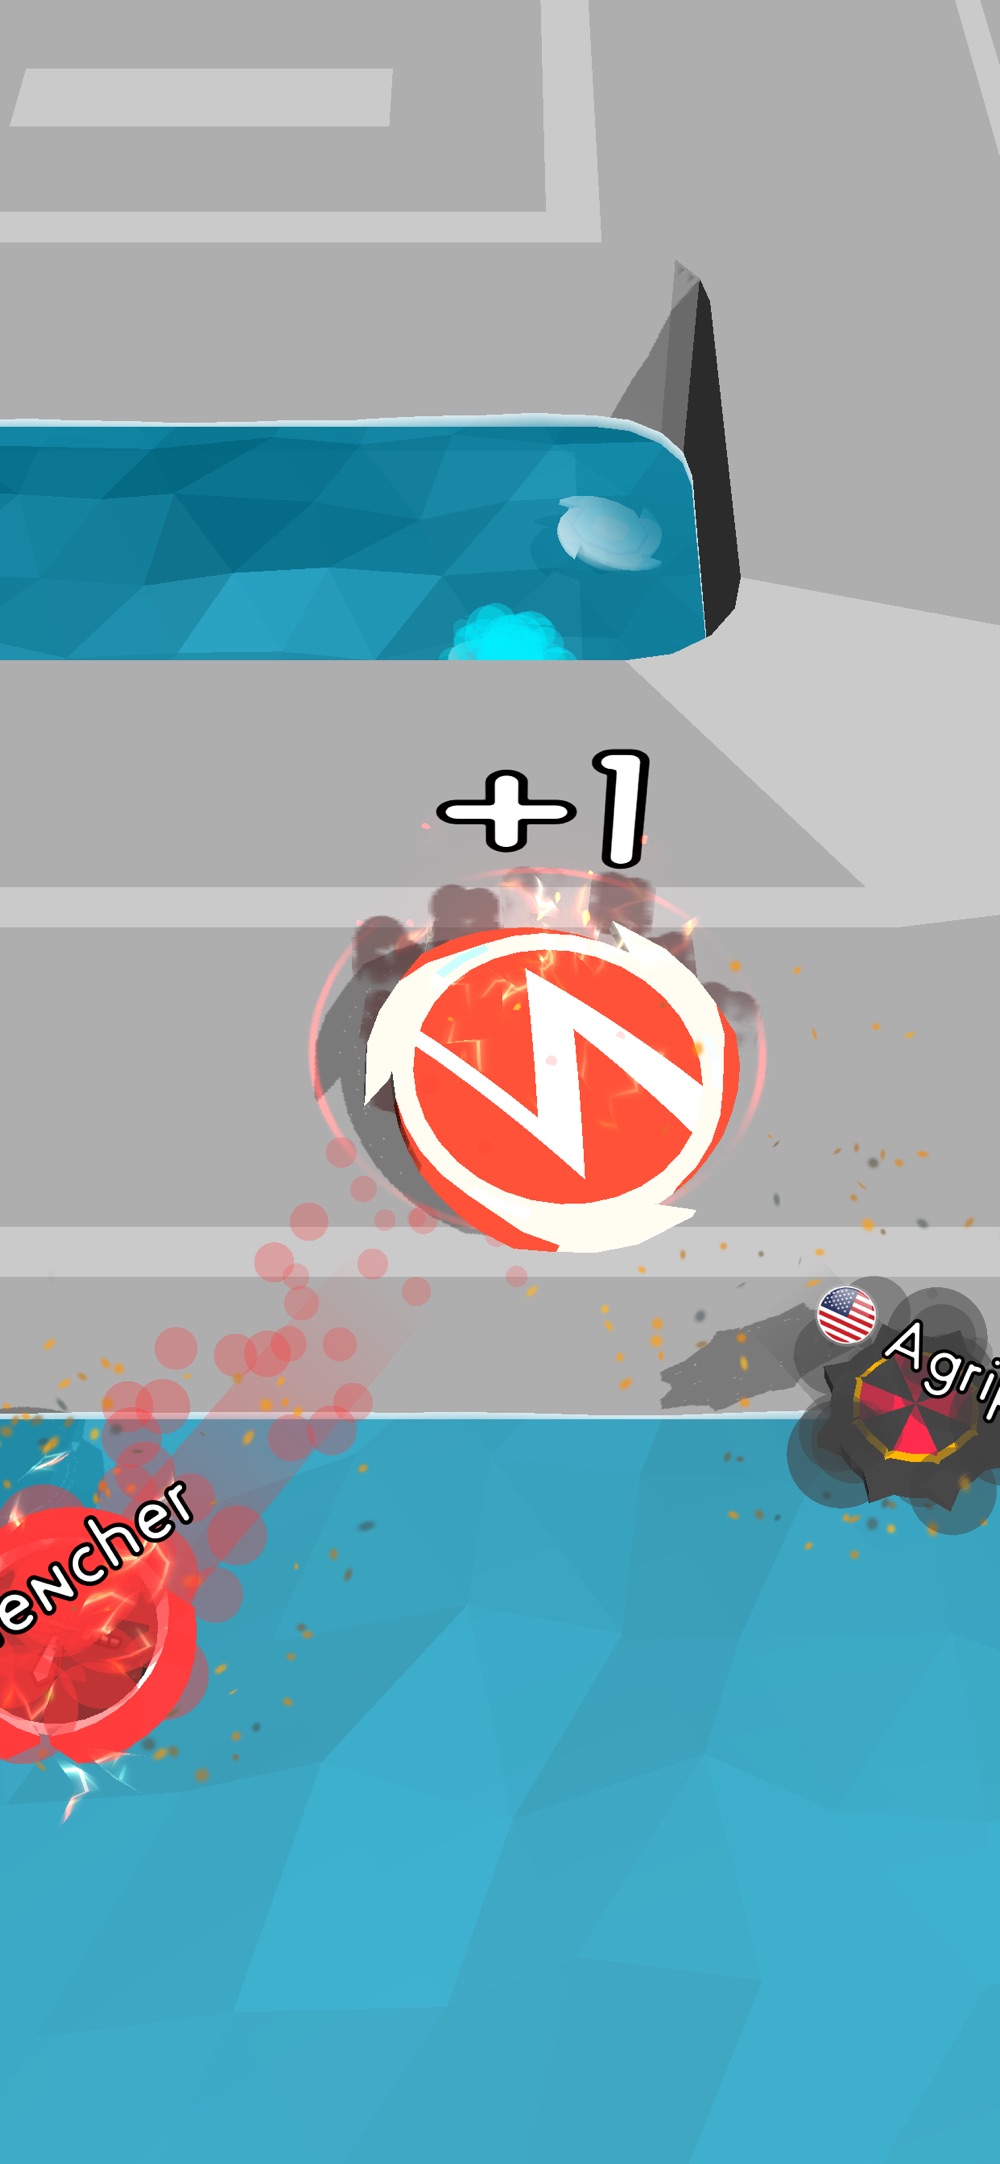 Top.io – Spinner Blade Arena